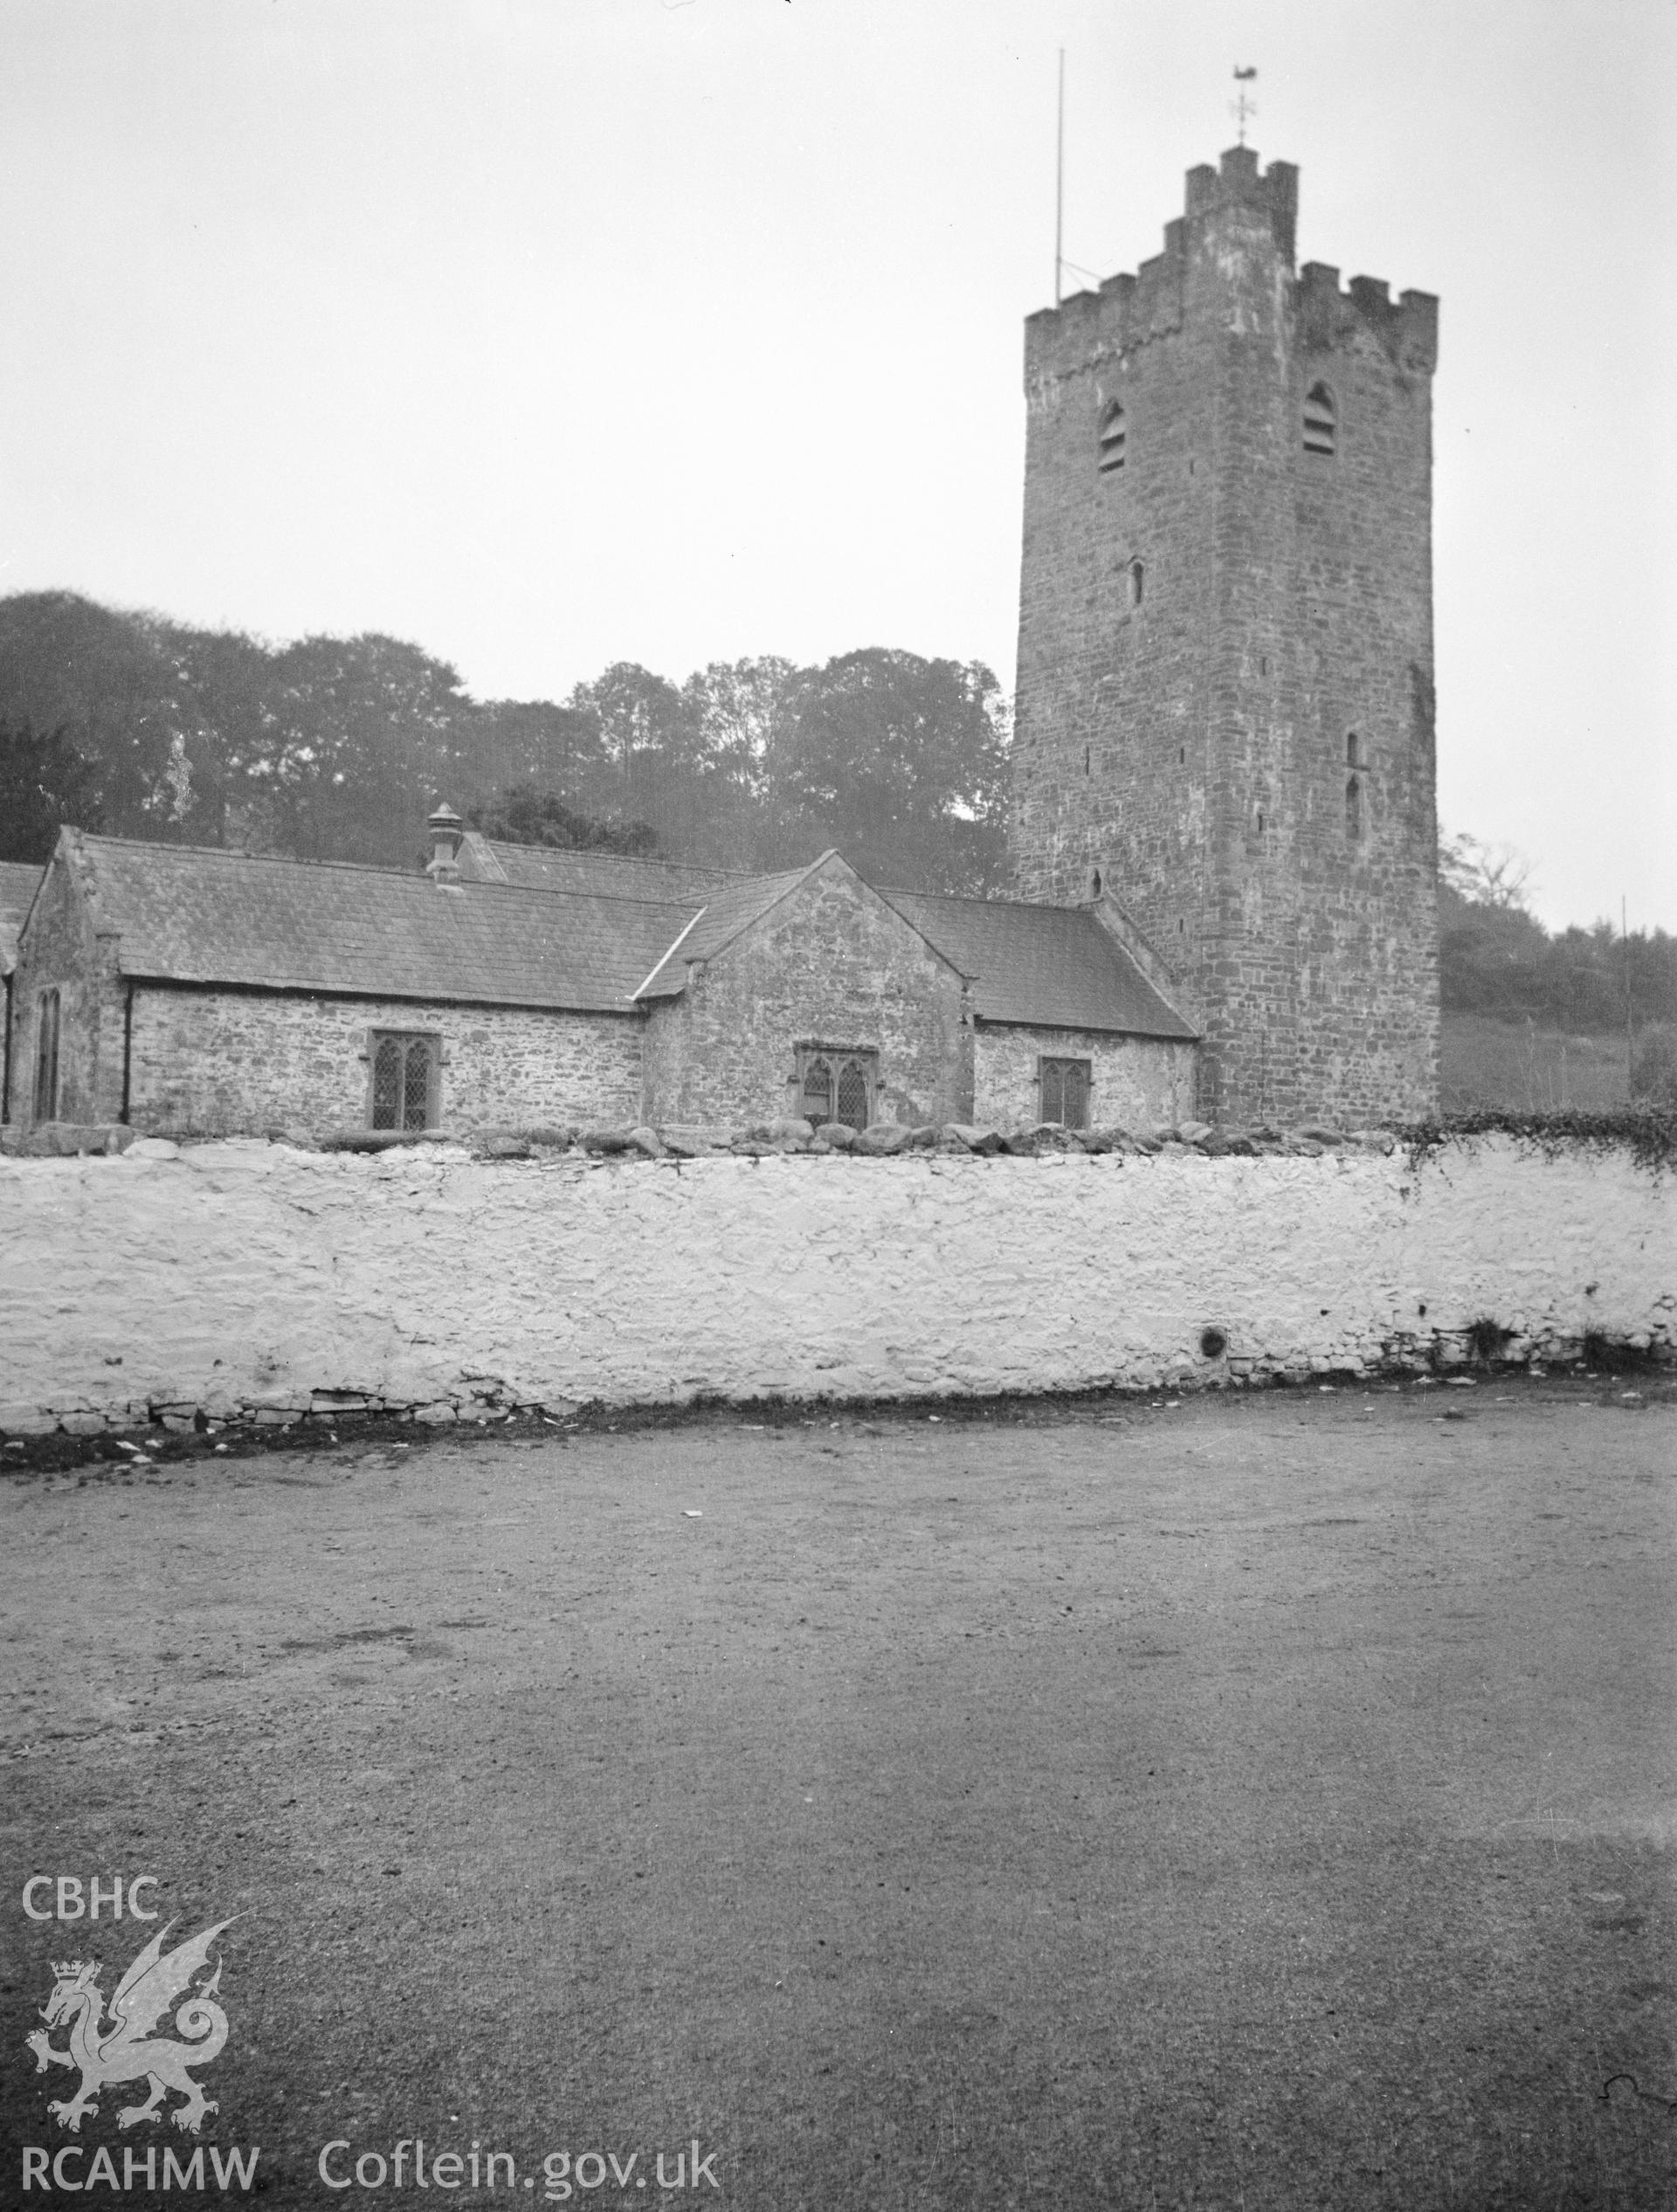 Digital copy of a nitrate negative showing view of north east exterior and white washed graveyard wall of St Stephen's Church, Llanstephan. From the National Building Record Postcard Collection.